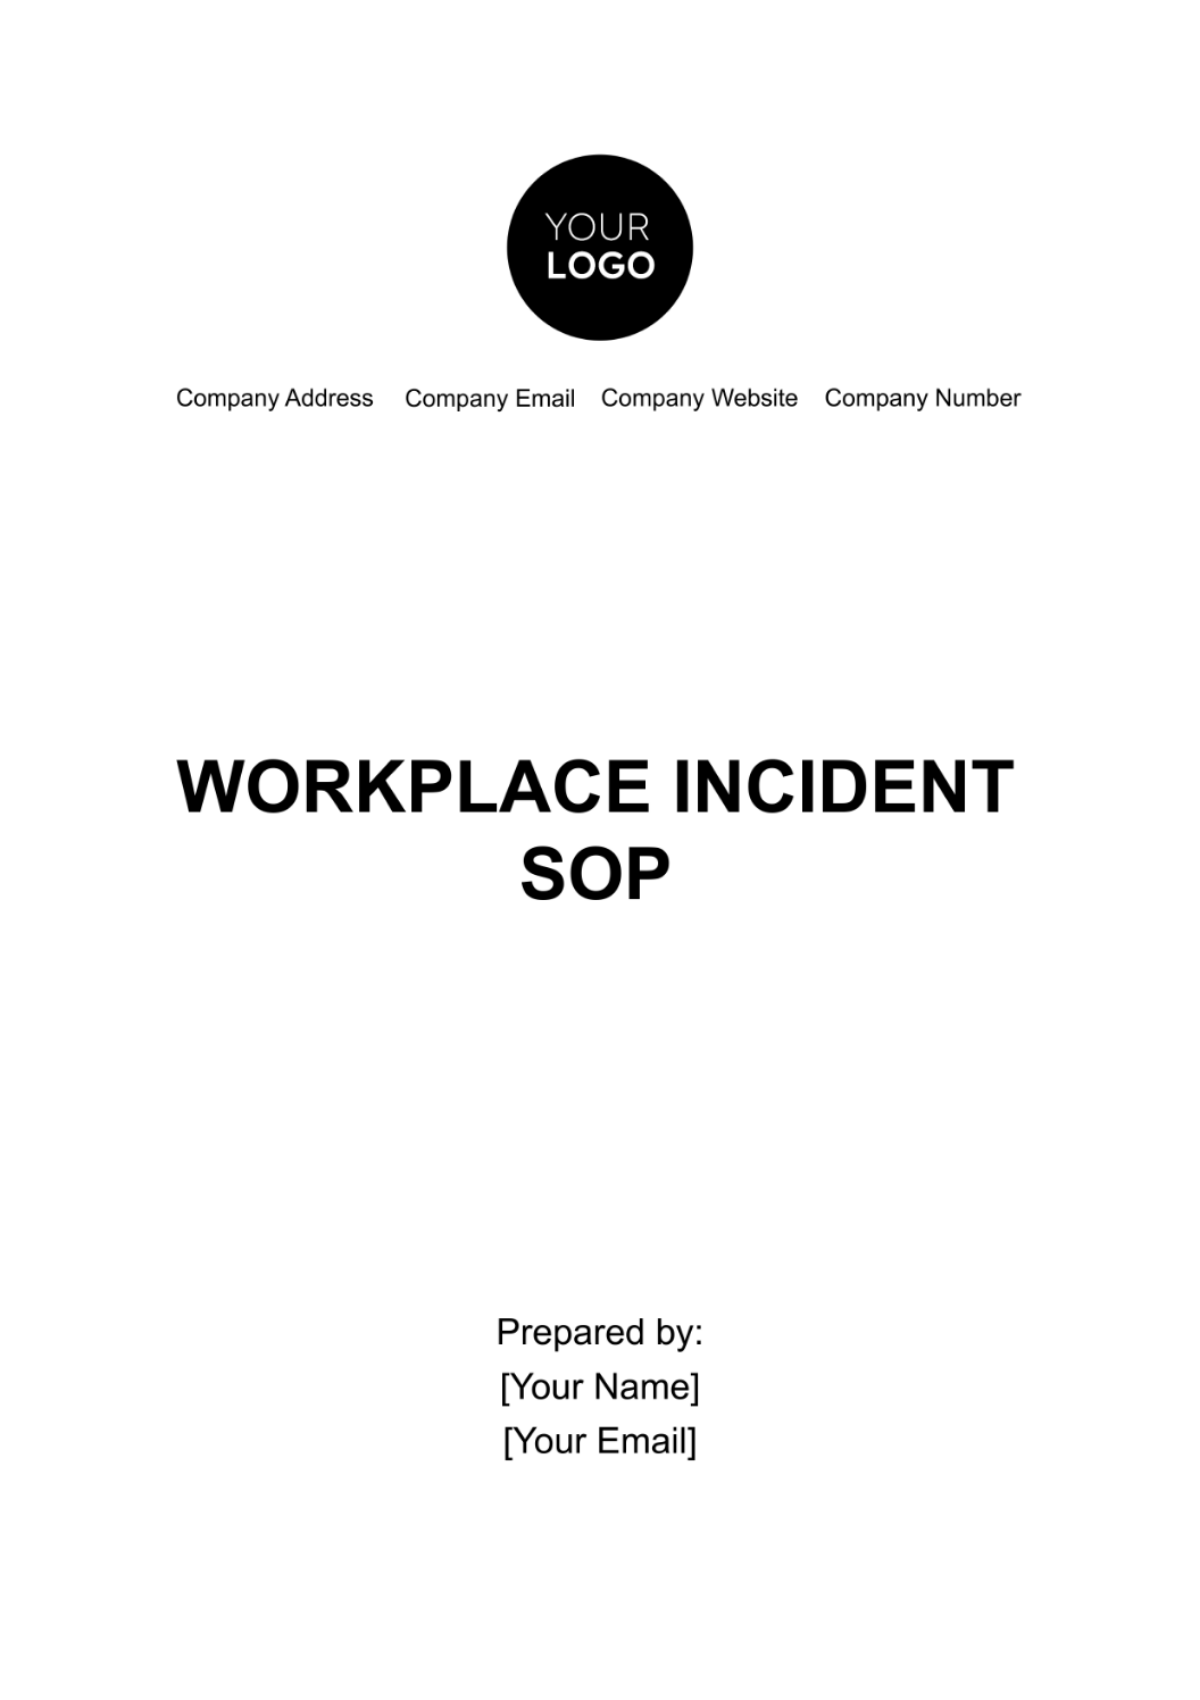 Free Workplace Incident SOP Template